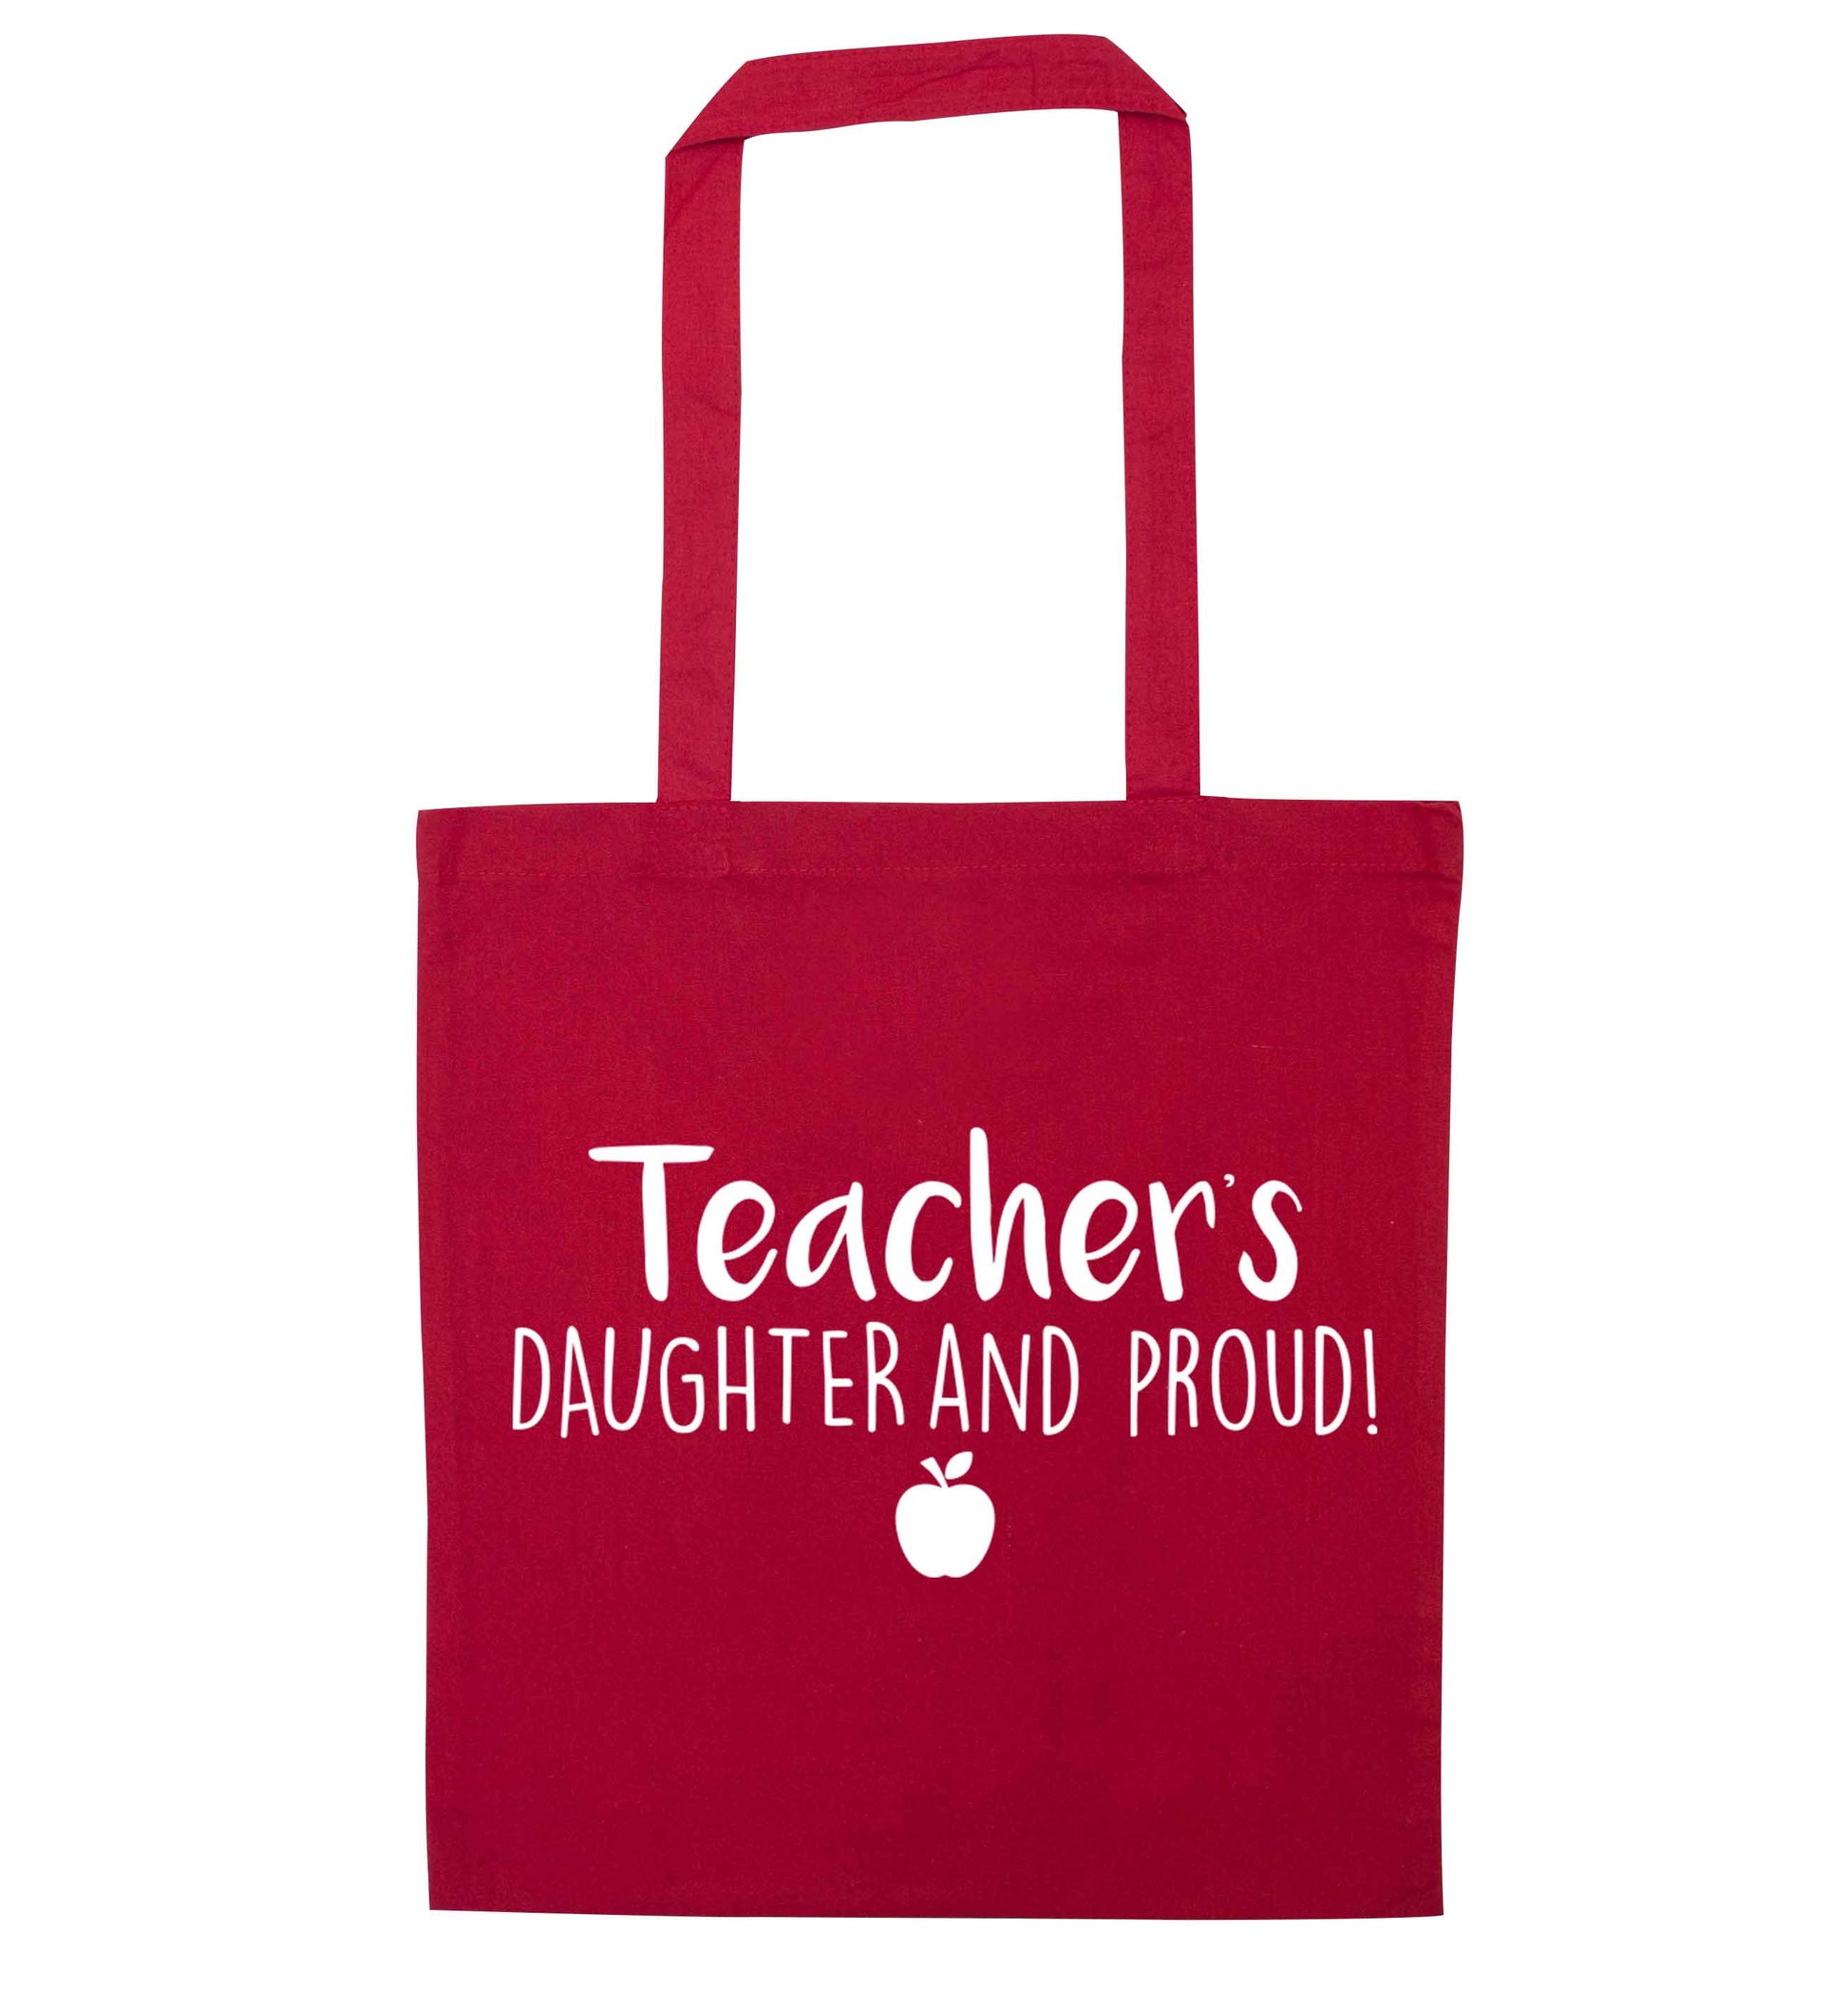 Teachers daughter and proud red tote bag